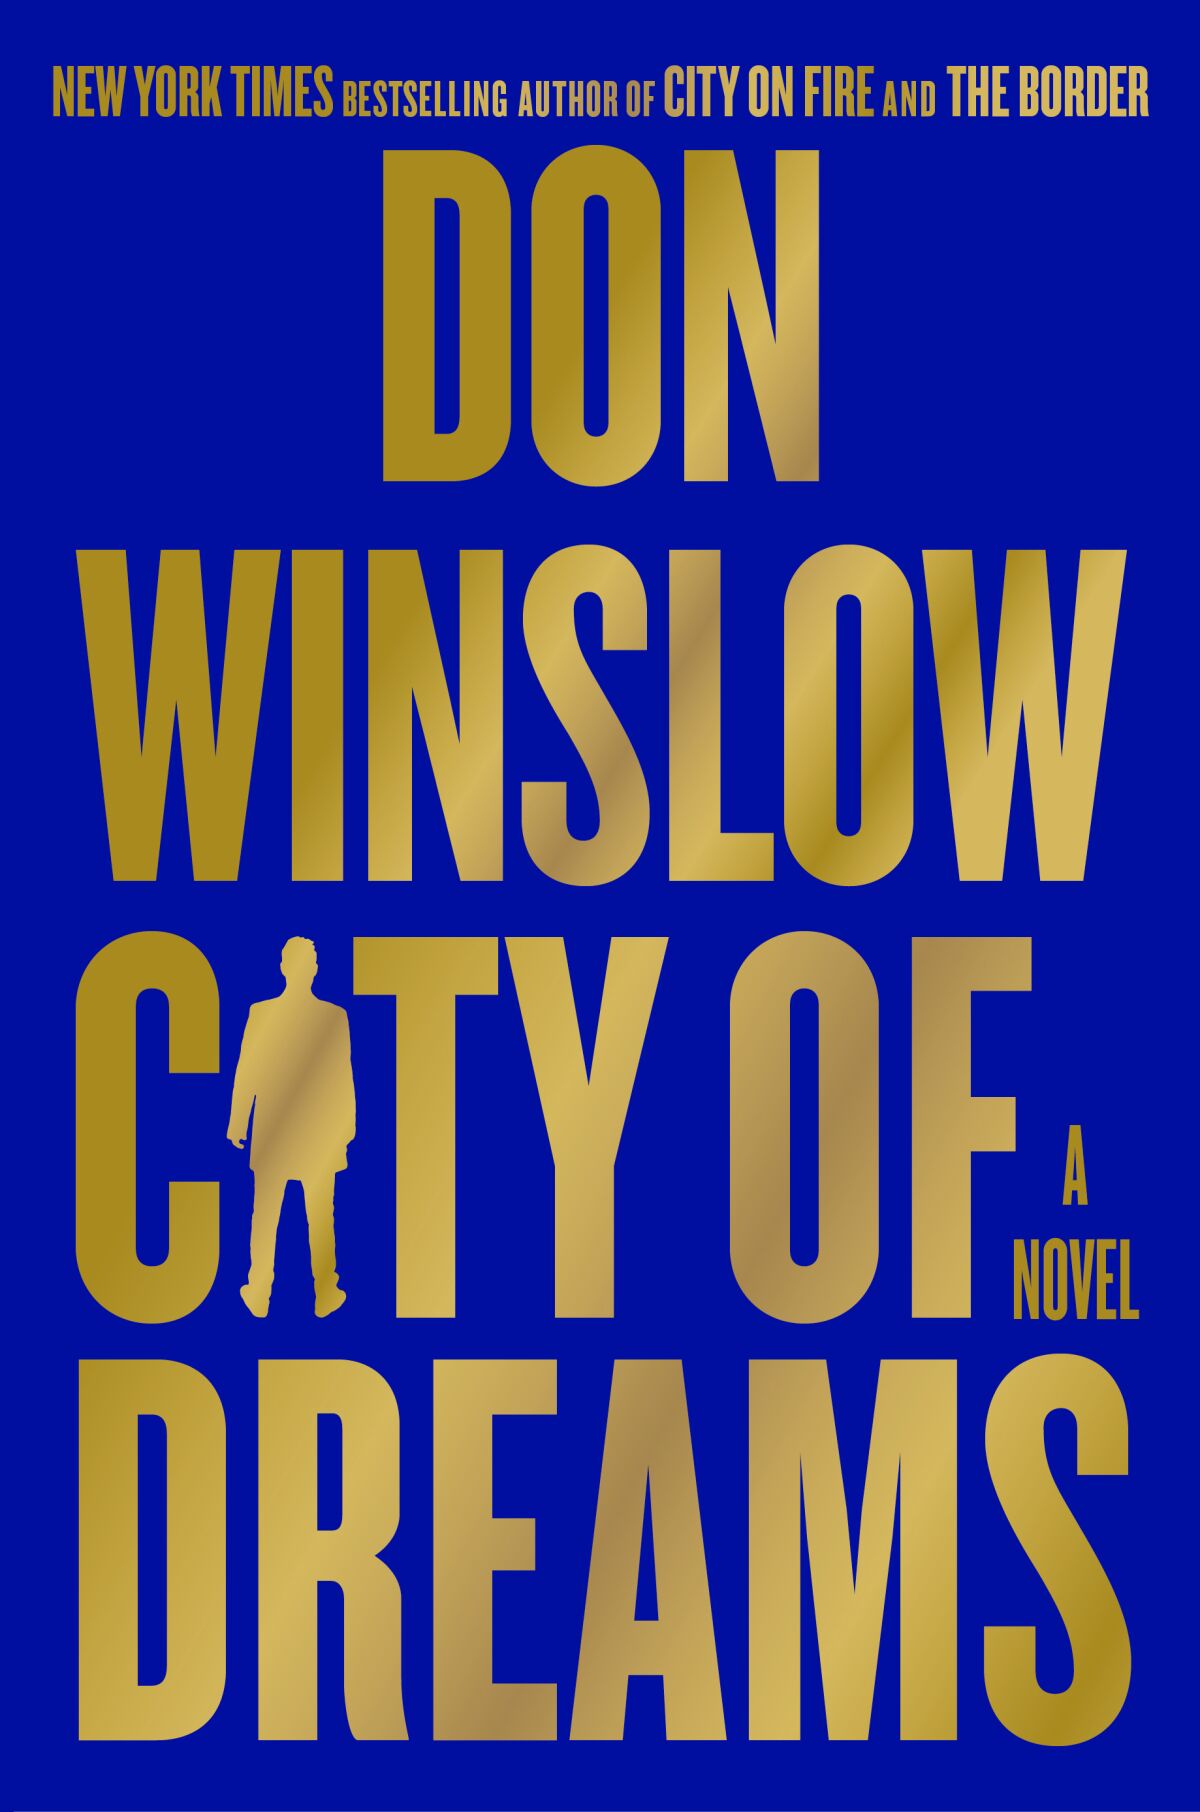 CITY OF DREAMS by Don Winslow